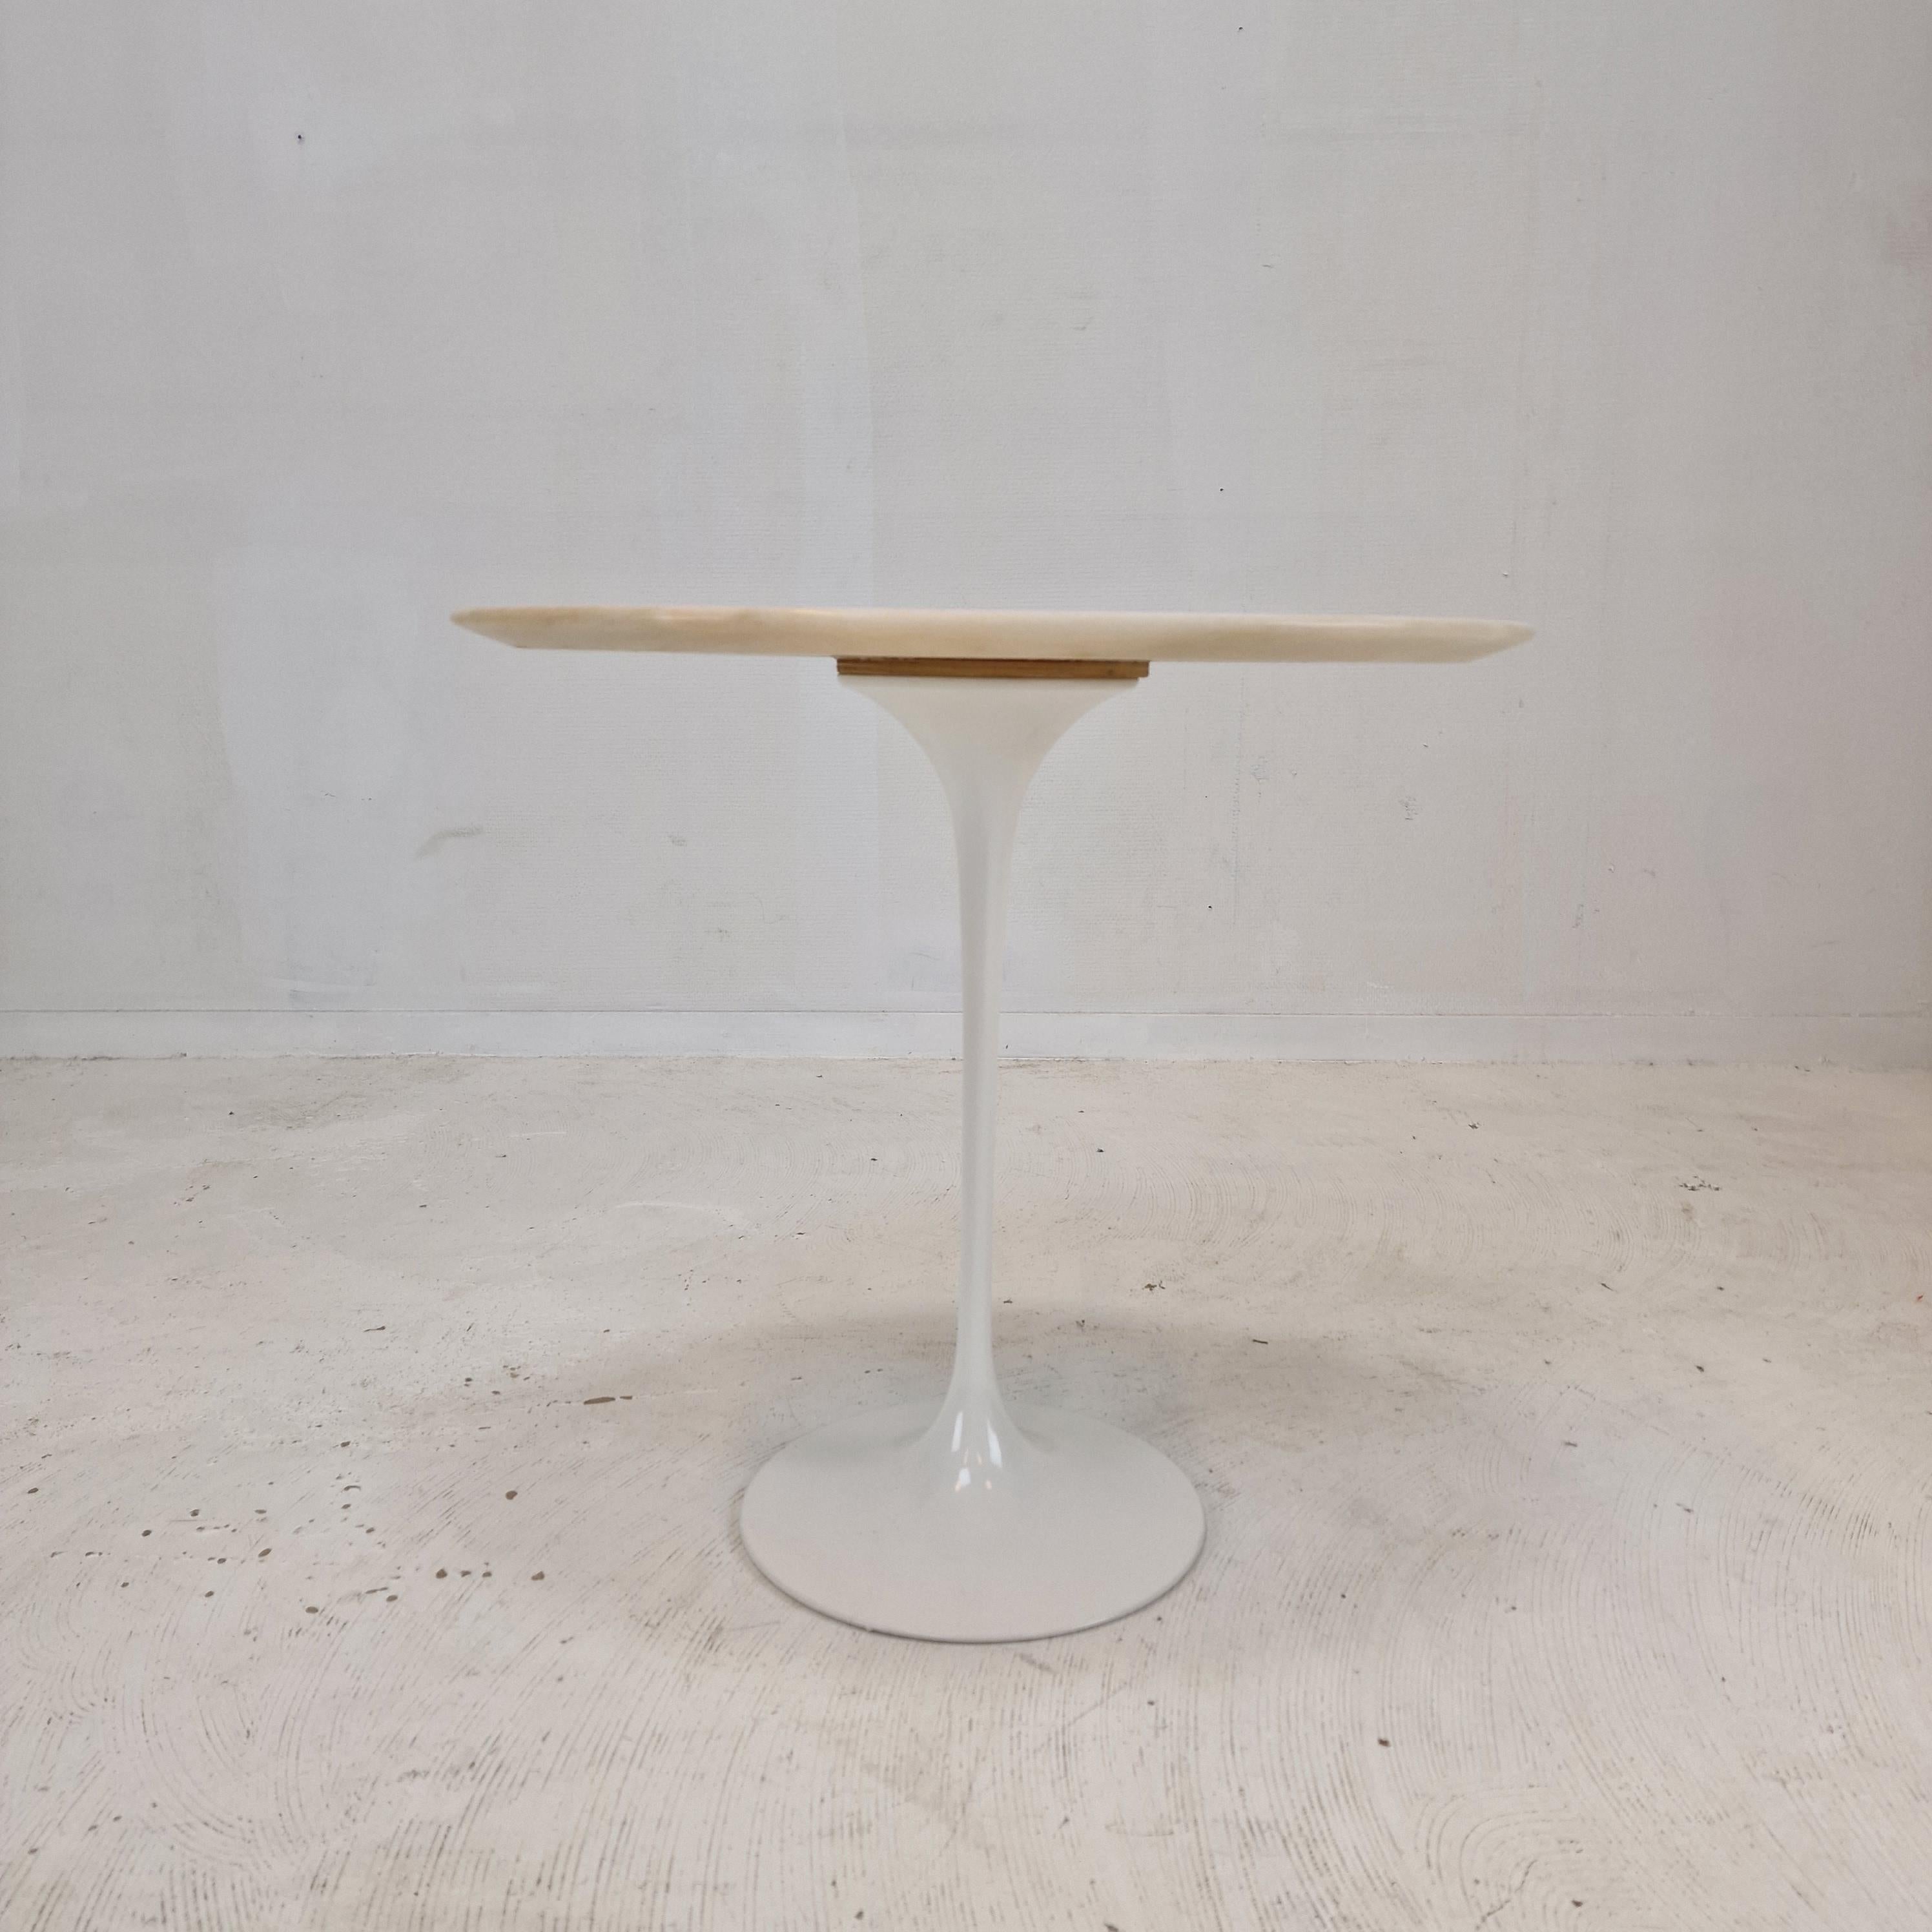 Late 20th Century Mid-Century Oval Marble Side Table by Eero Saarinen for Knoll For Sale